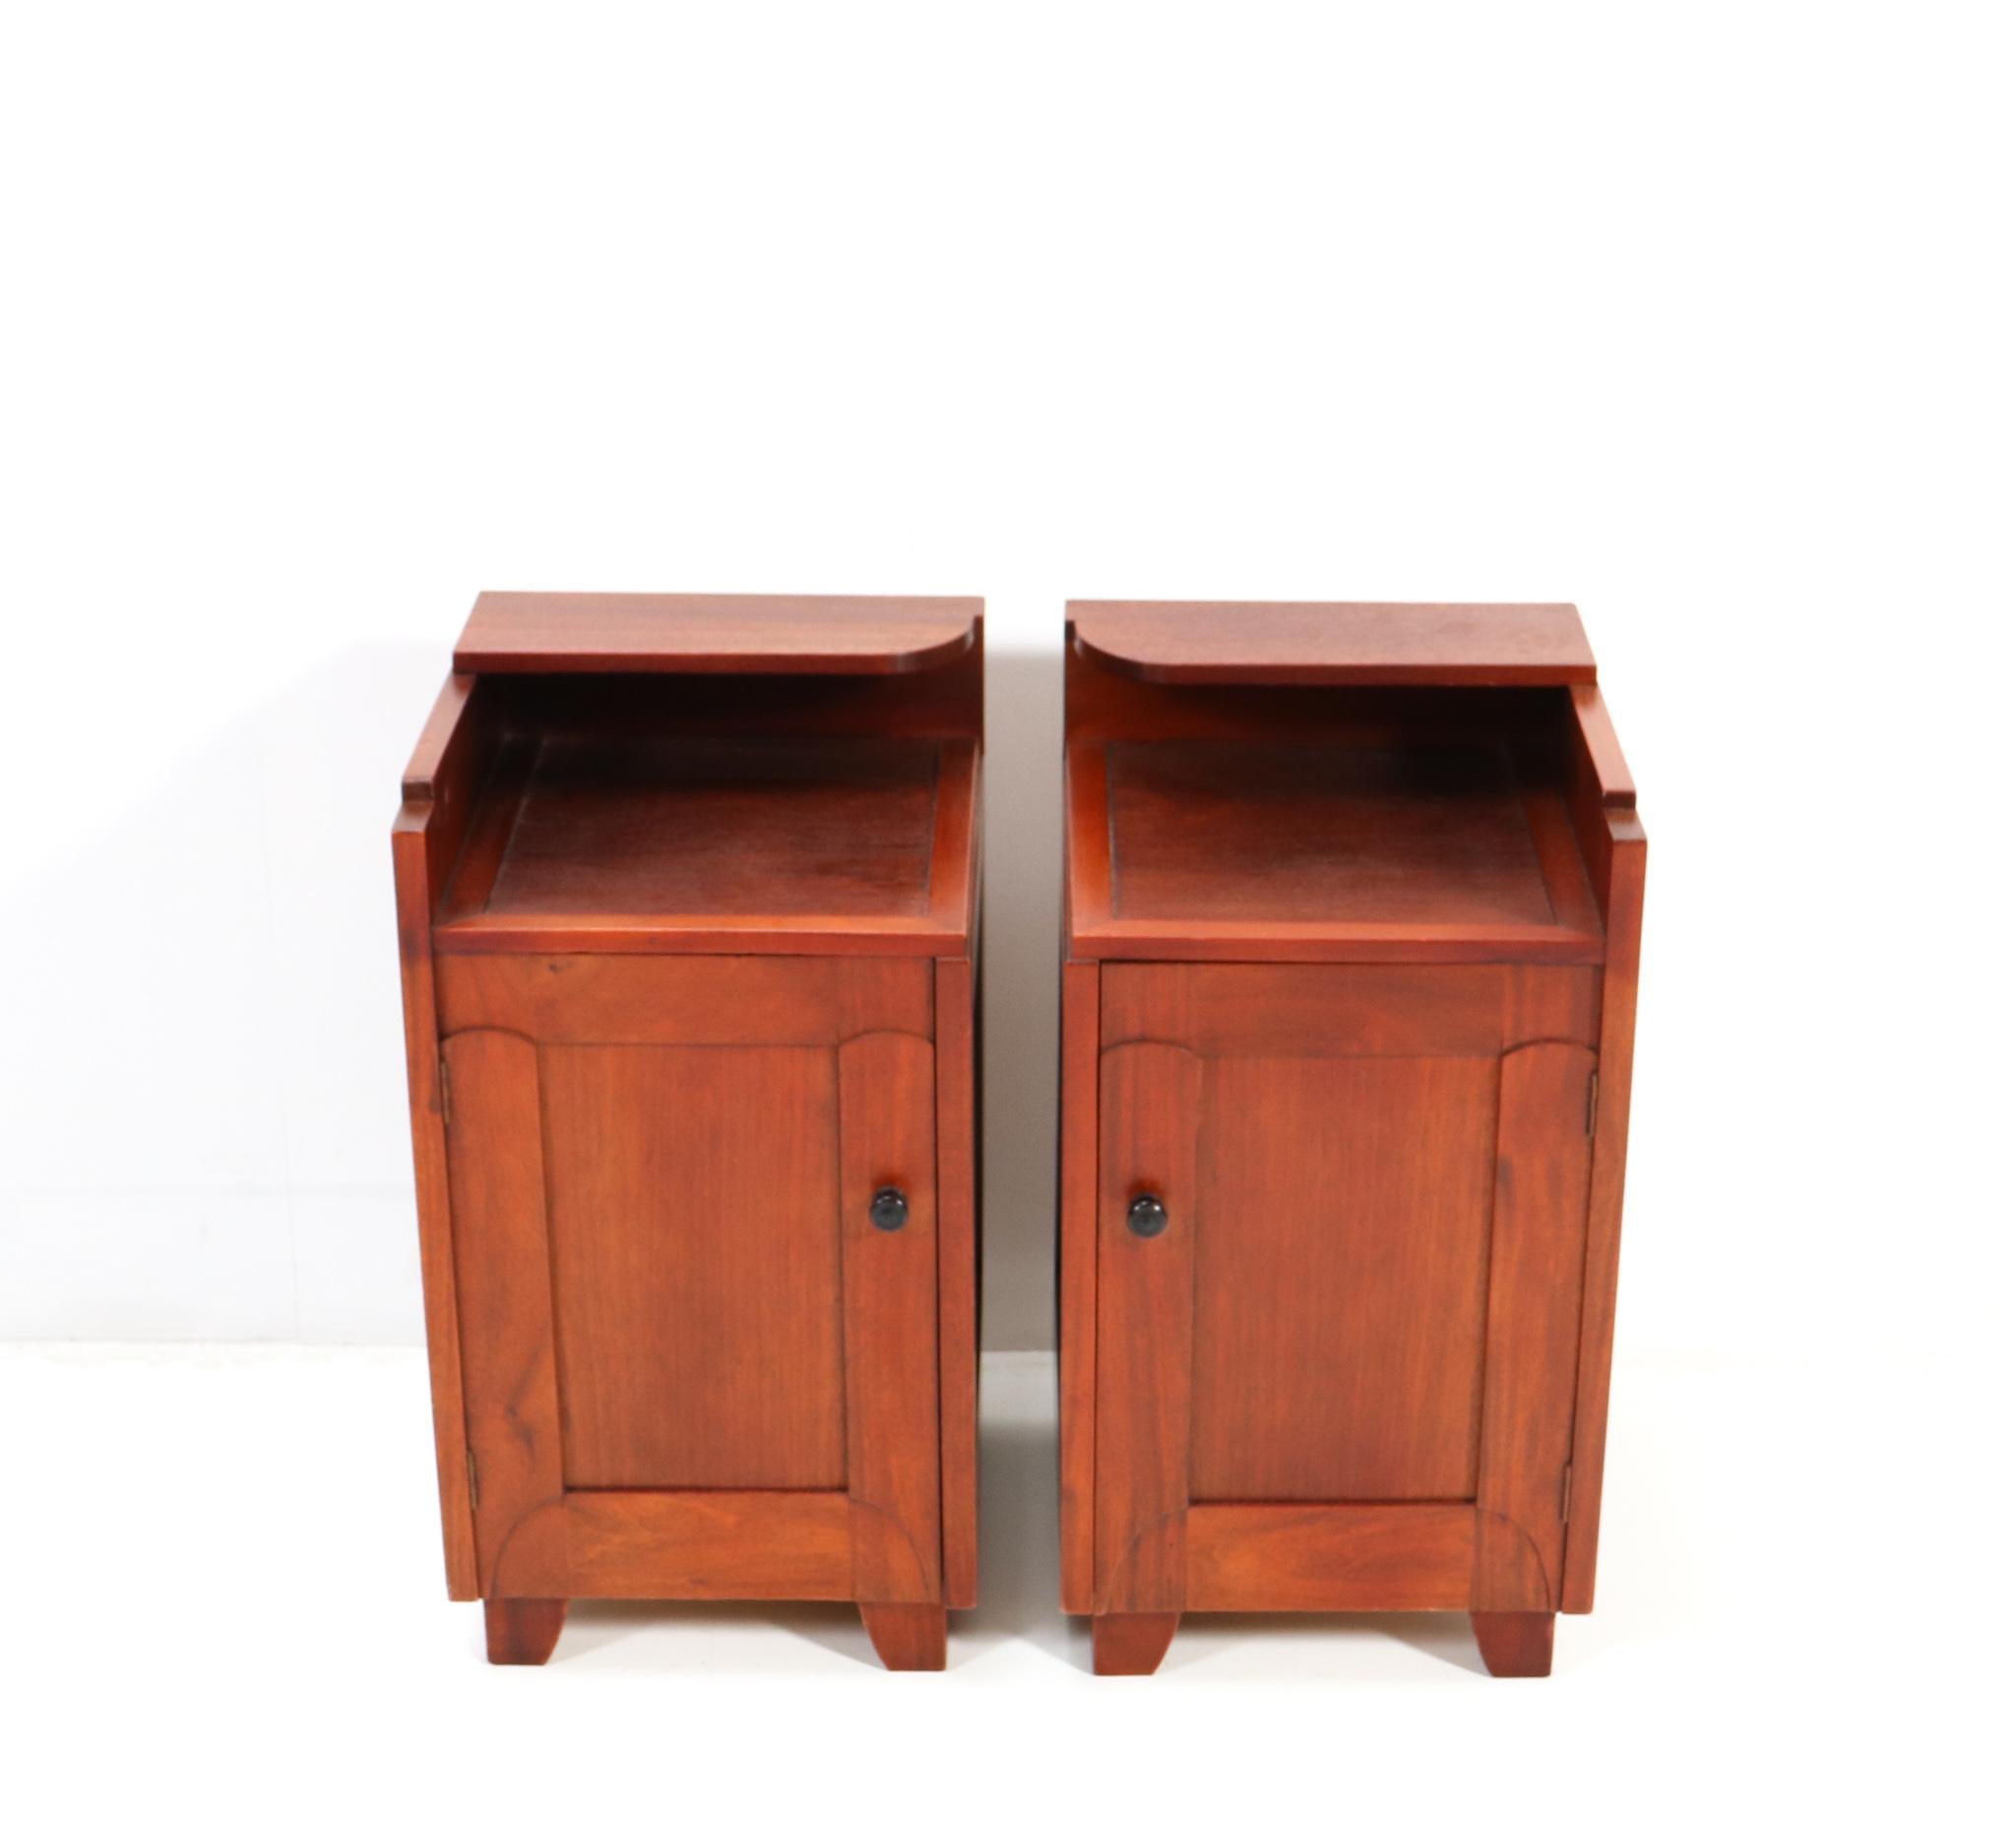 Stunning set of two Art Deco Amsterdamse School nightstands or bedside tables.
Striking Dutch design from the 1920s.
Solid walnut and original walnut veneer with original ebony knobs.
This wonderful pair of Art Deco Amsterdamse School nightstands